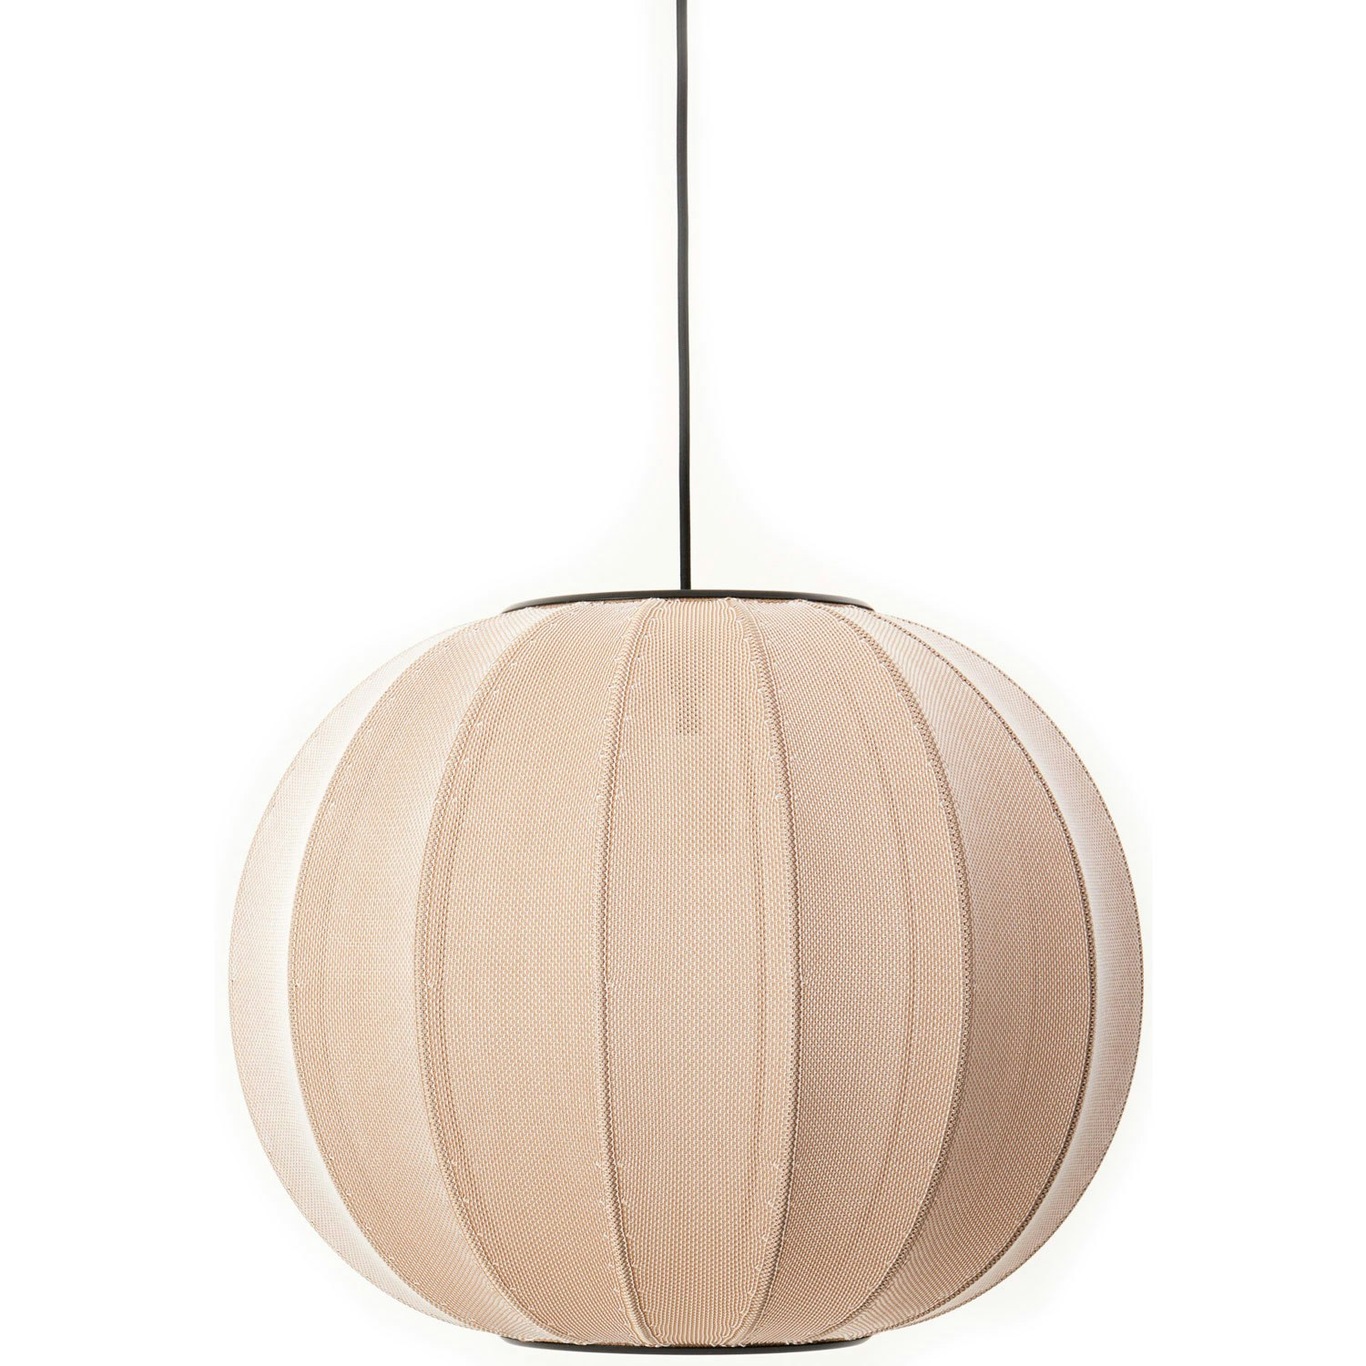 Knit-Wit Hanglamp Rond 45 cm, Sand Stone